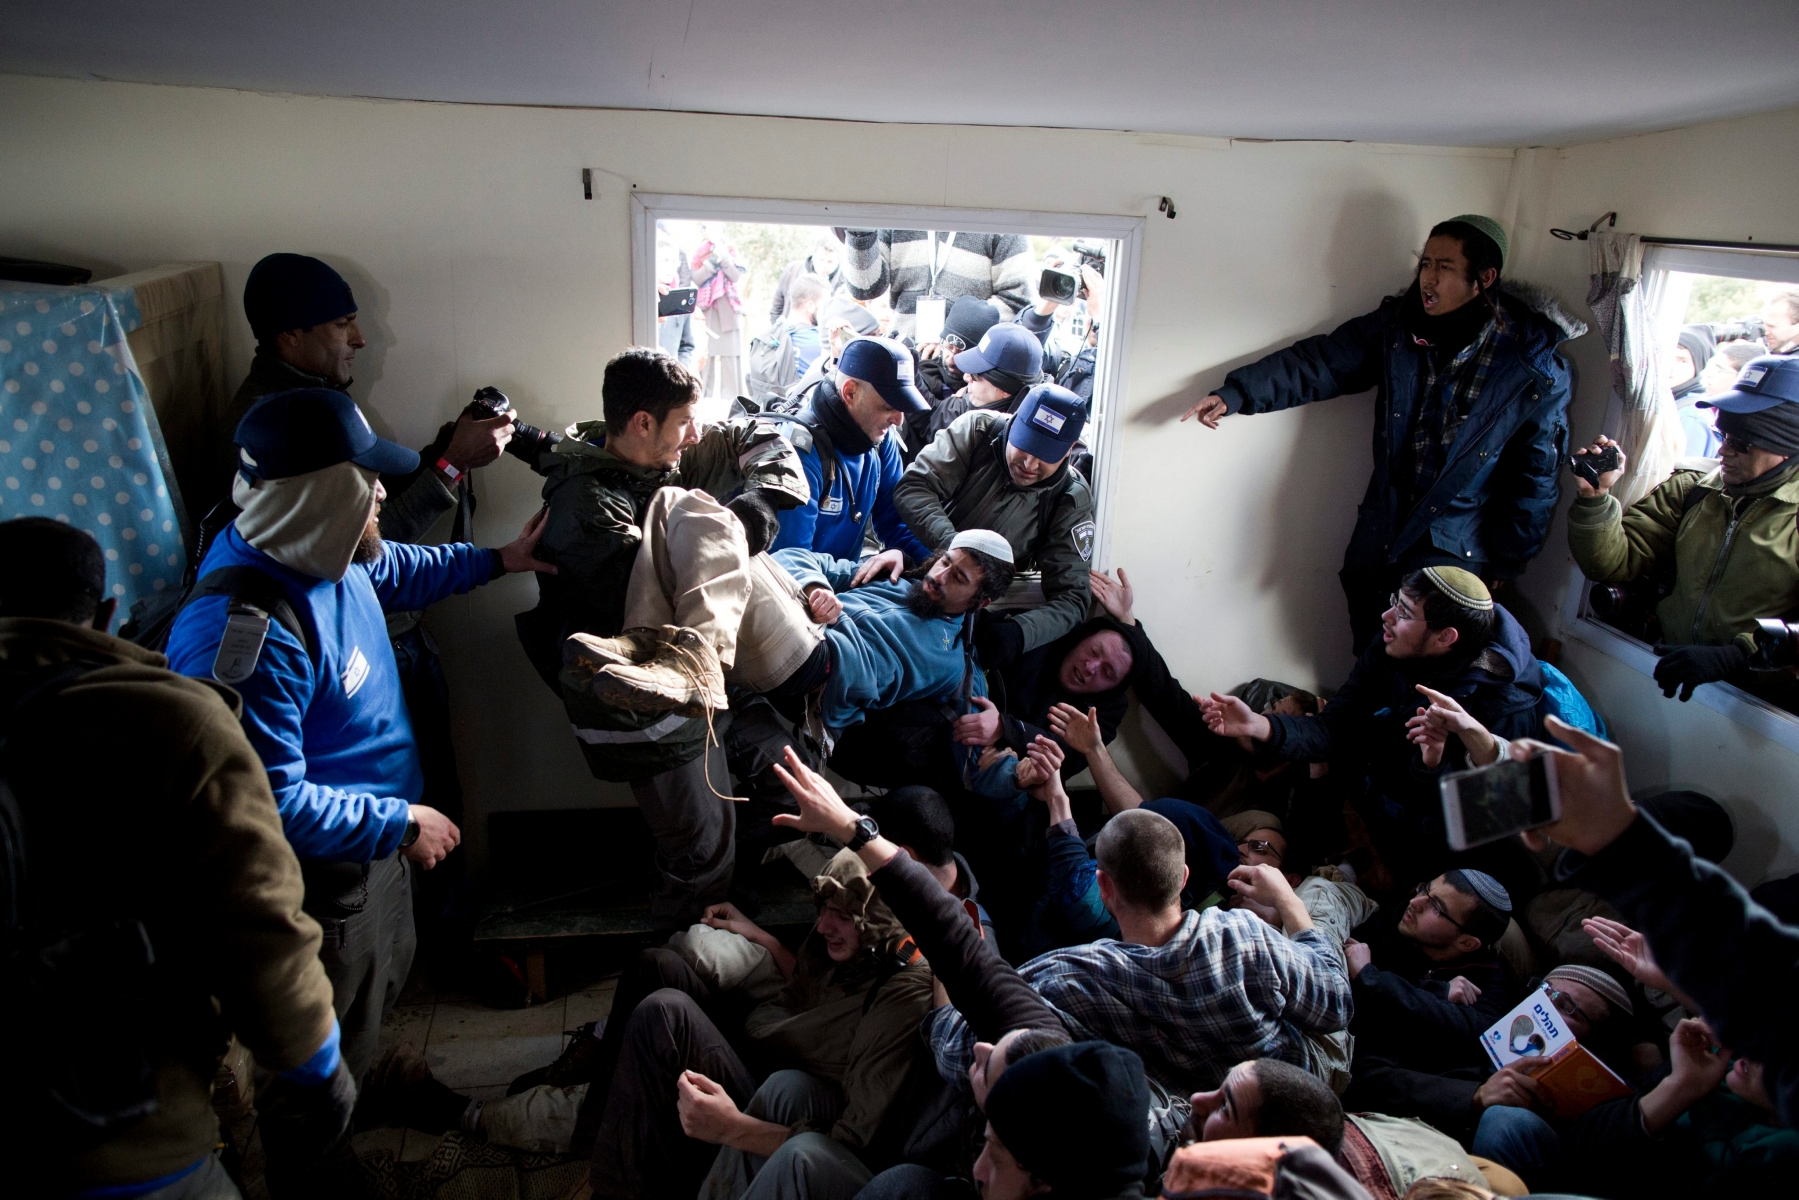 epa05764800 Israeli security forces try to arrest settlers who hold each other in a house during the evacuation of the illegal Jewish settlement of Amona, in the West Bank, 01 February 2017. Israeli police have deployed 3,000 policemen around the settlement for a planned eviction ordered by the Israeli Supreme Court.  EPA/ABIR SULTAN MIDEAST ISRAEL SETTLERS AMONA